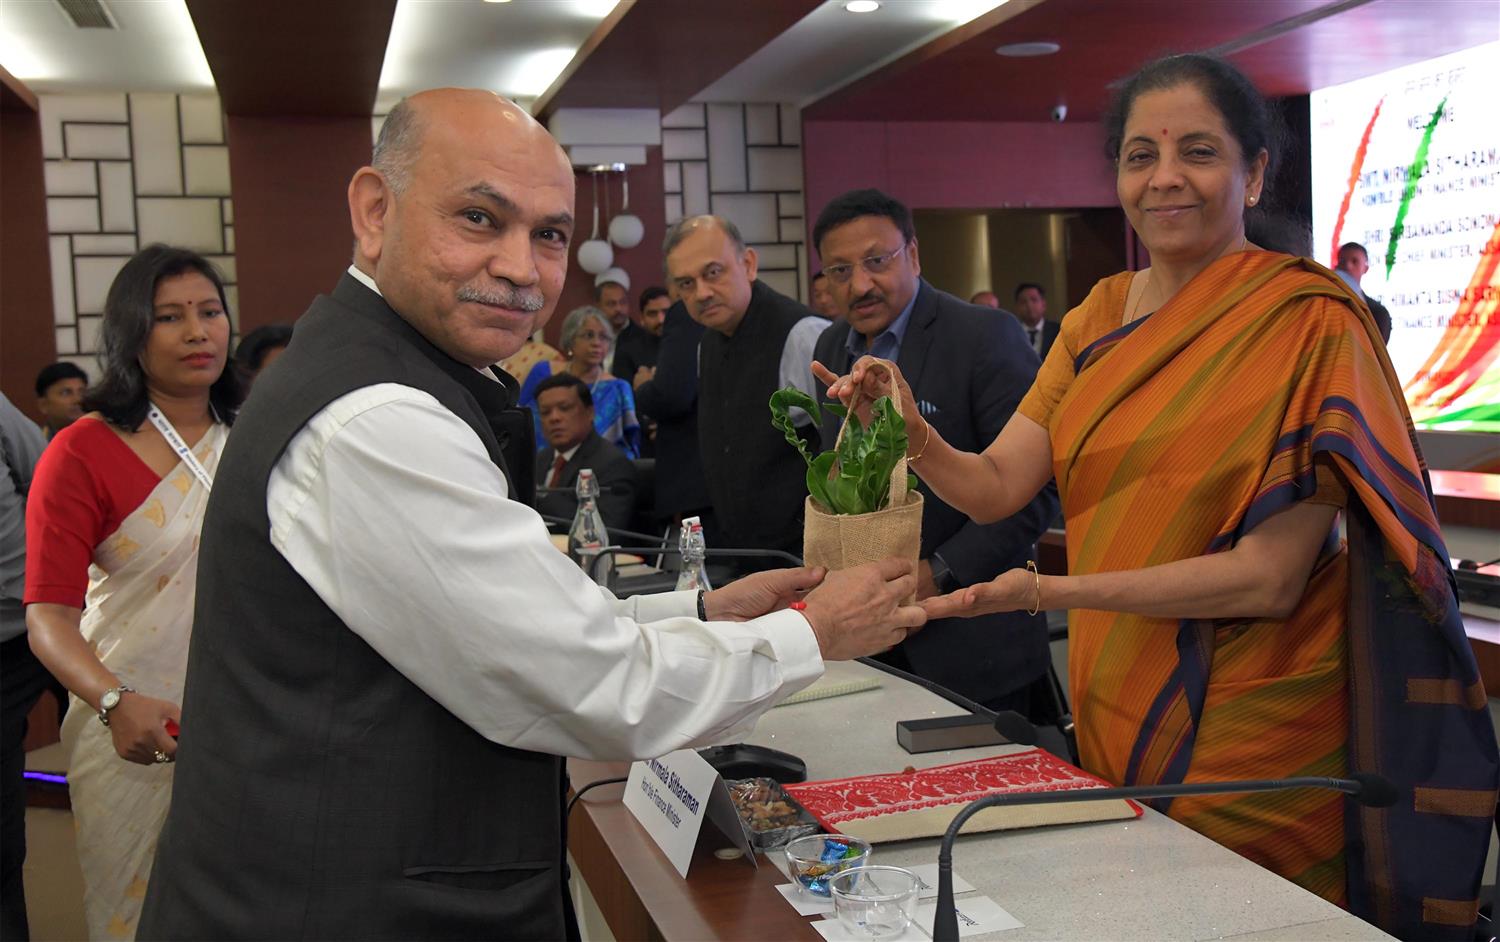  Union Minister of Finance & Corporate Affairs, Smt. Nirmala Sitharaman is being welcomed at a function of  Trade and  Industry representative, Academicians economist & Policy Experts and Bankers at Assam Administrative Staff College Guwahati on 27th February 2020.

